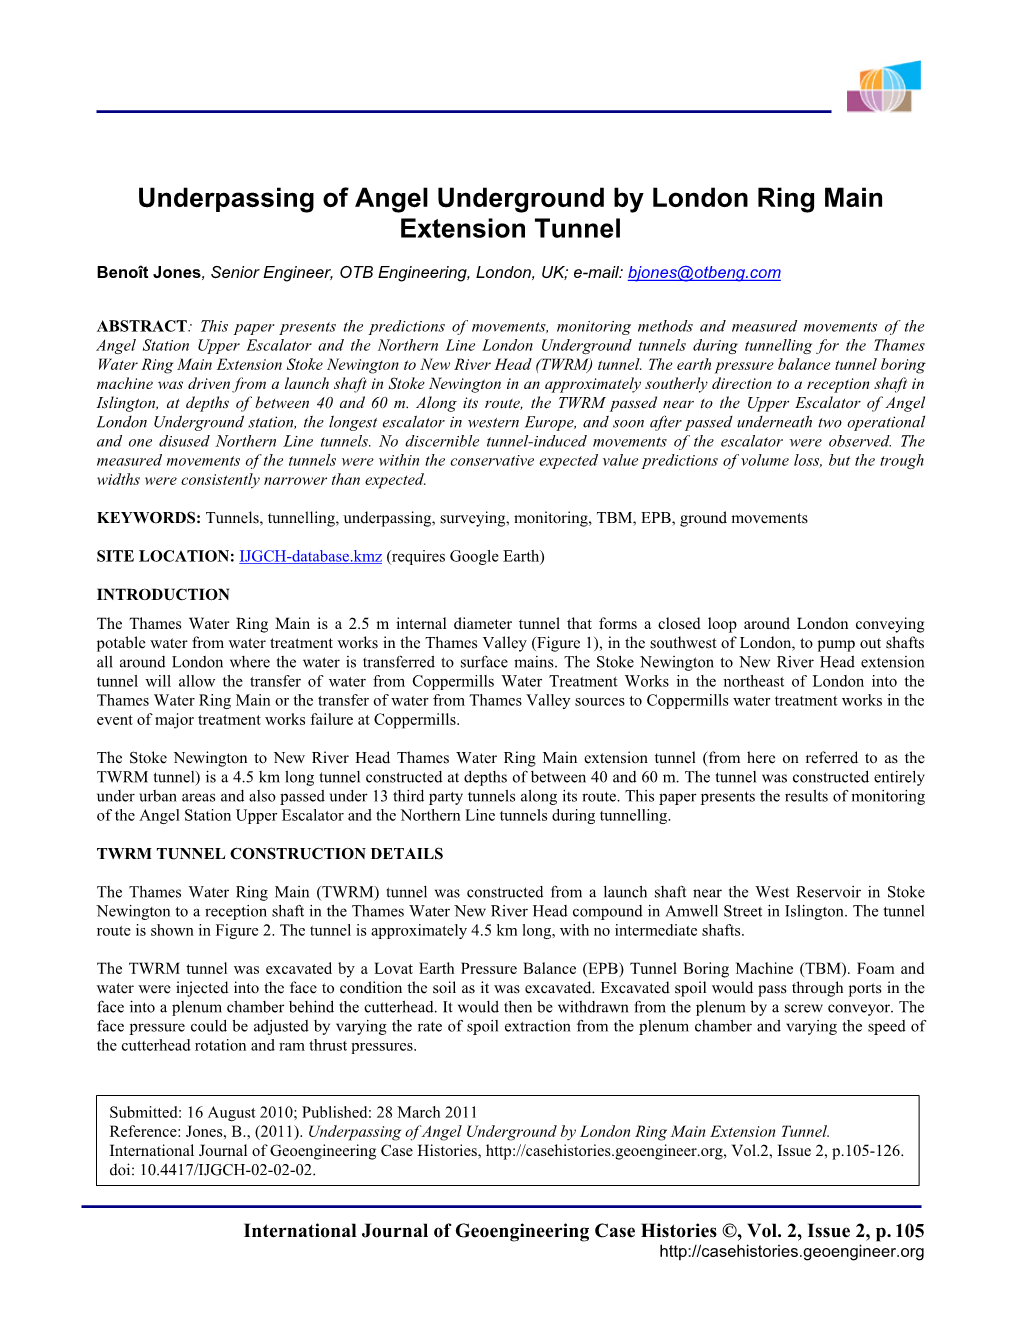 Underpassing of Angel Underground by London Ring Main Extension Tunnel